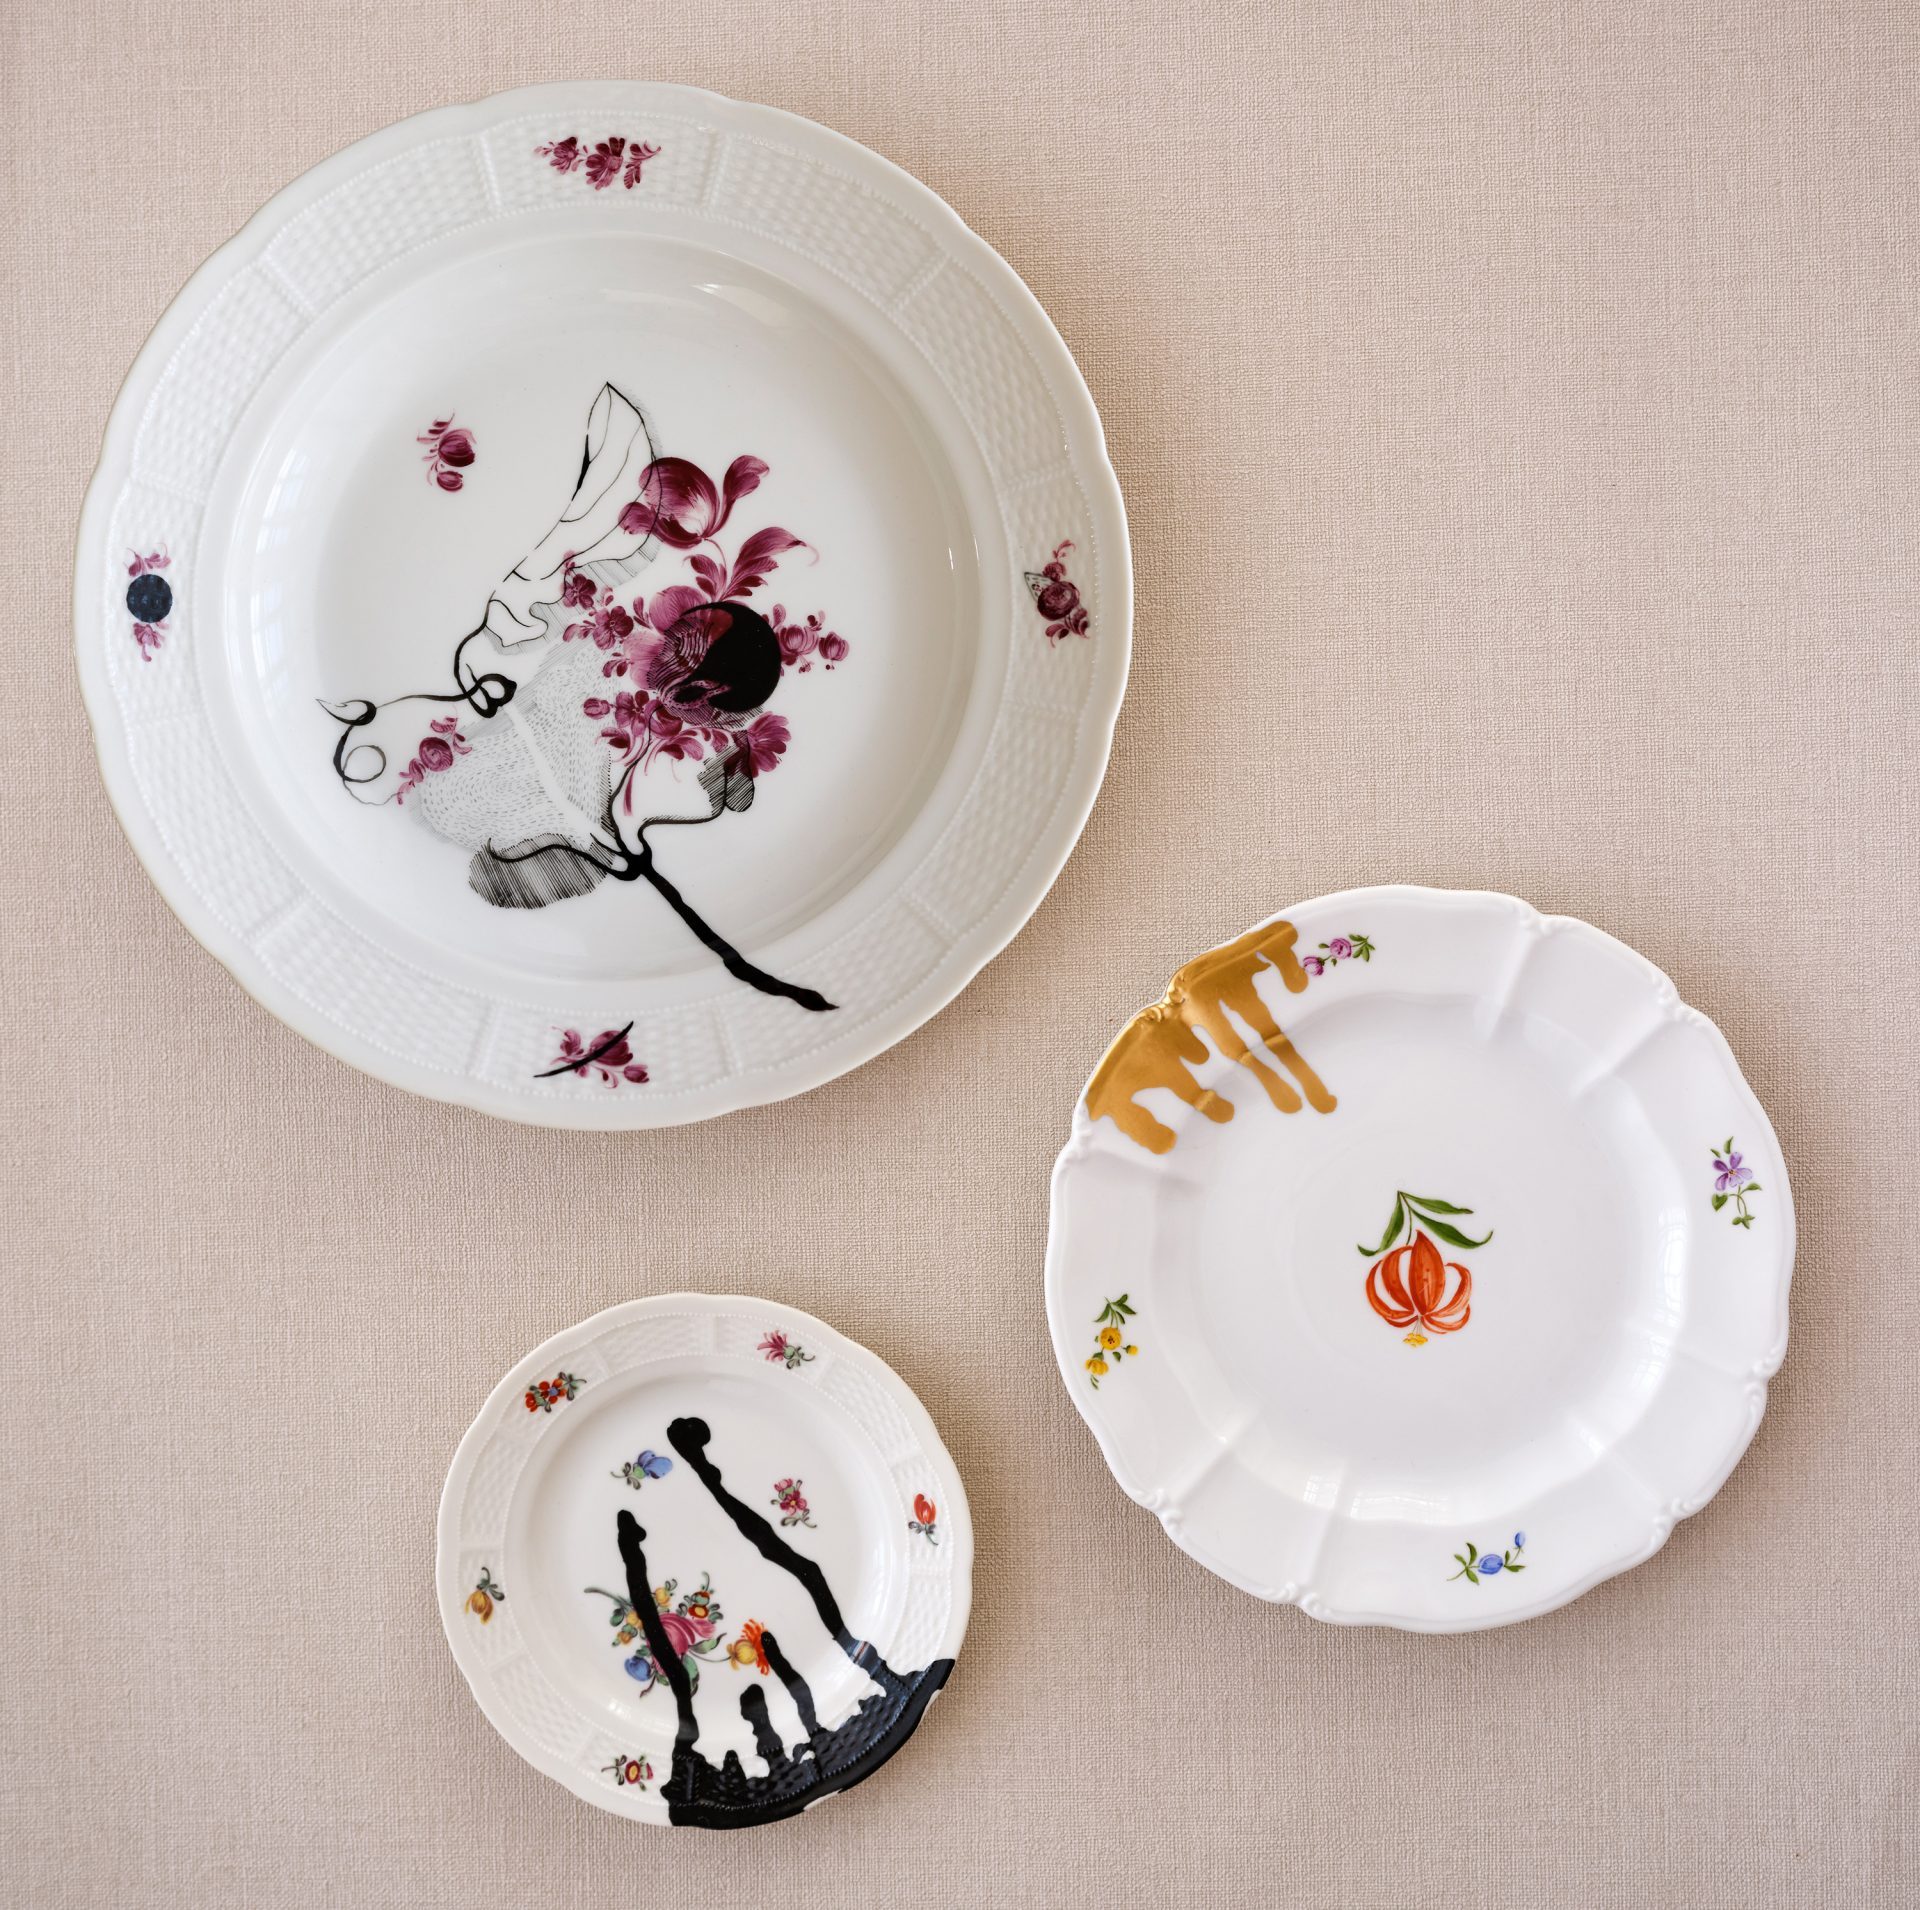 Three plates of different sizes with floral decorations, painted second decoration above